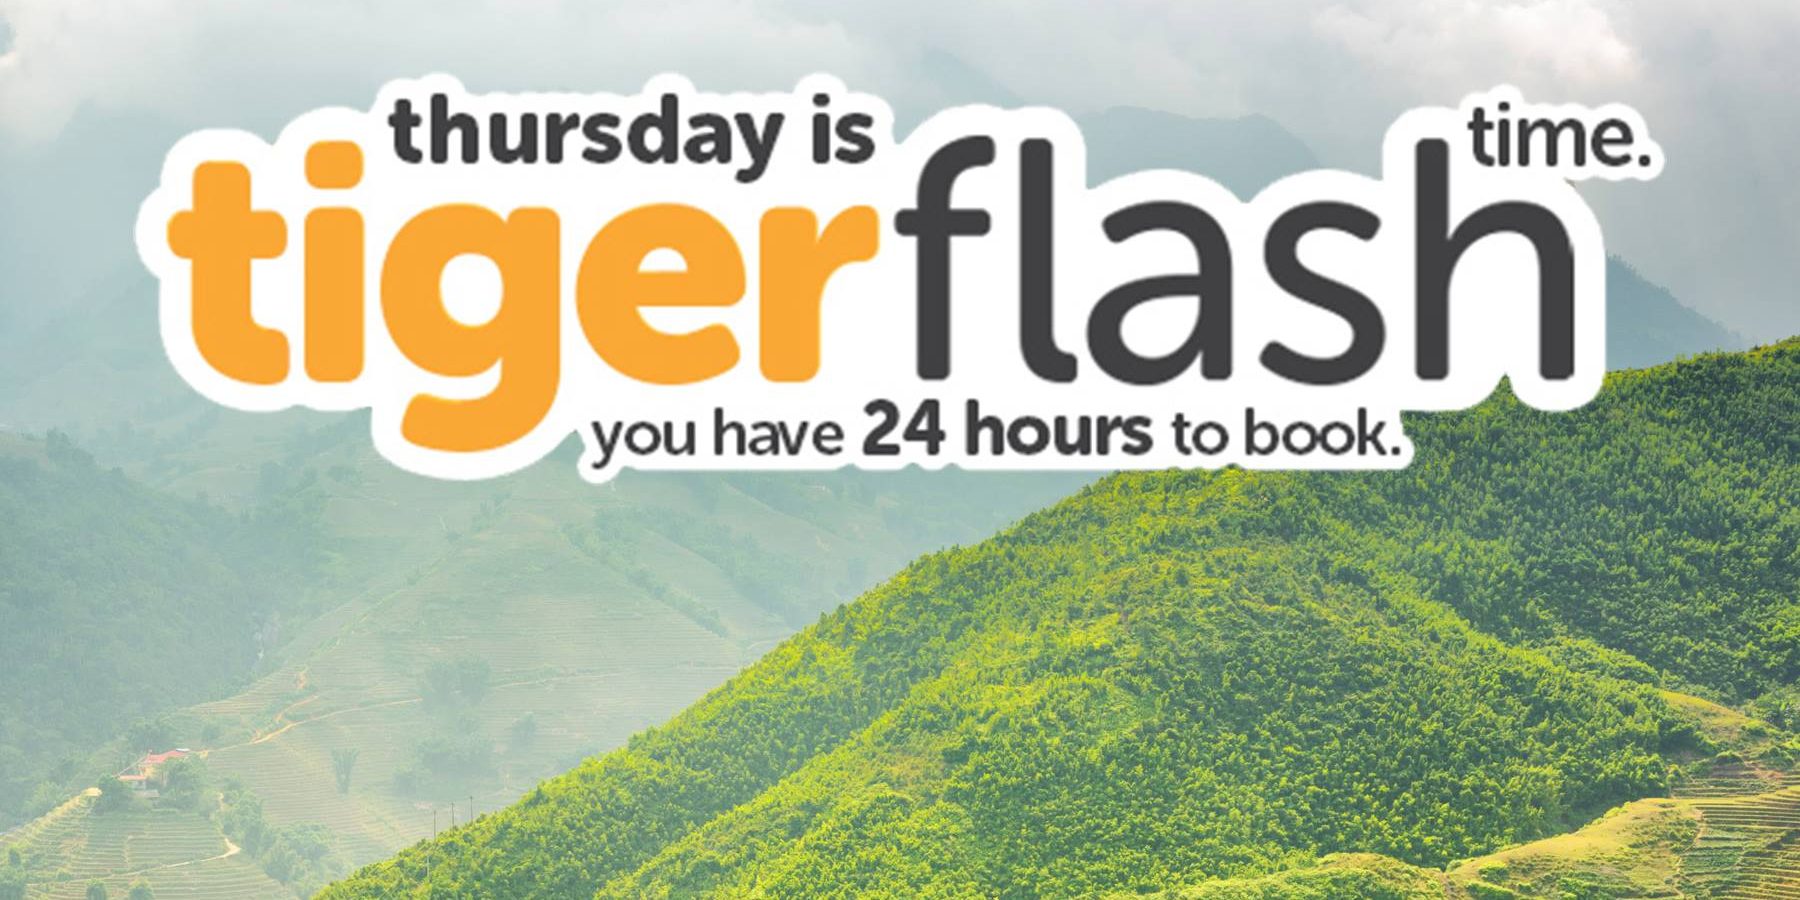 Tigerair Singapore Thursday Tiger Flash Time 24 Hours Promotion 18-19 May 2017